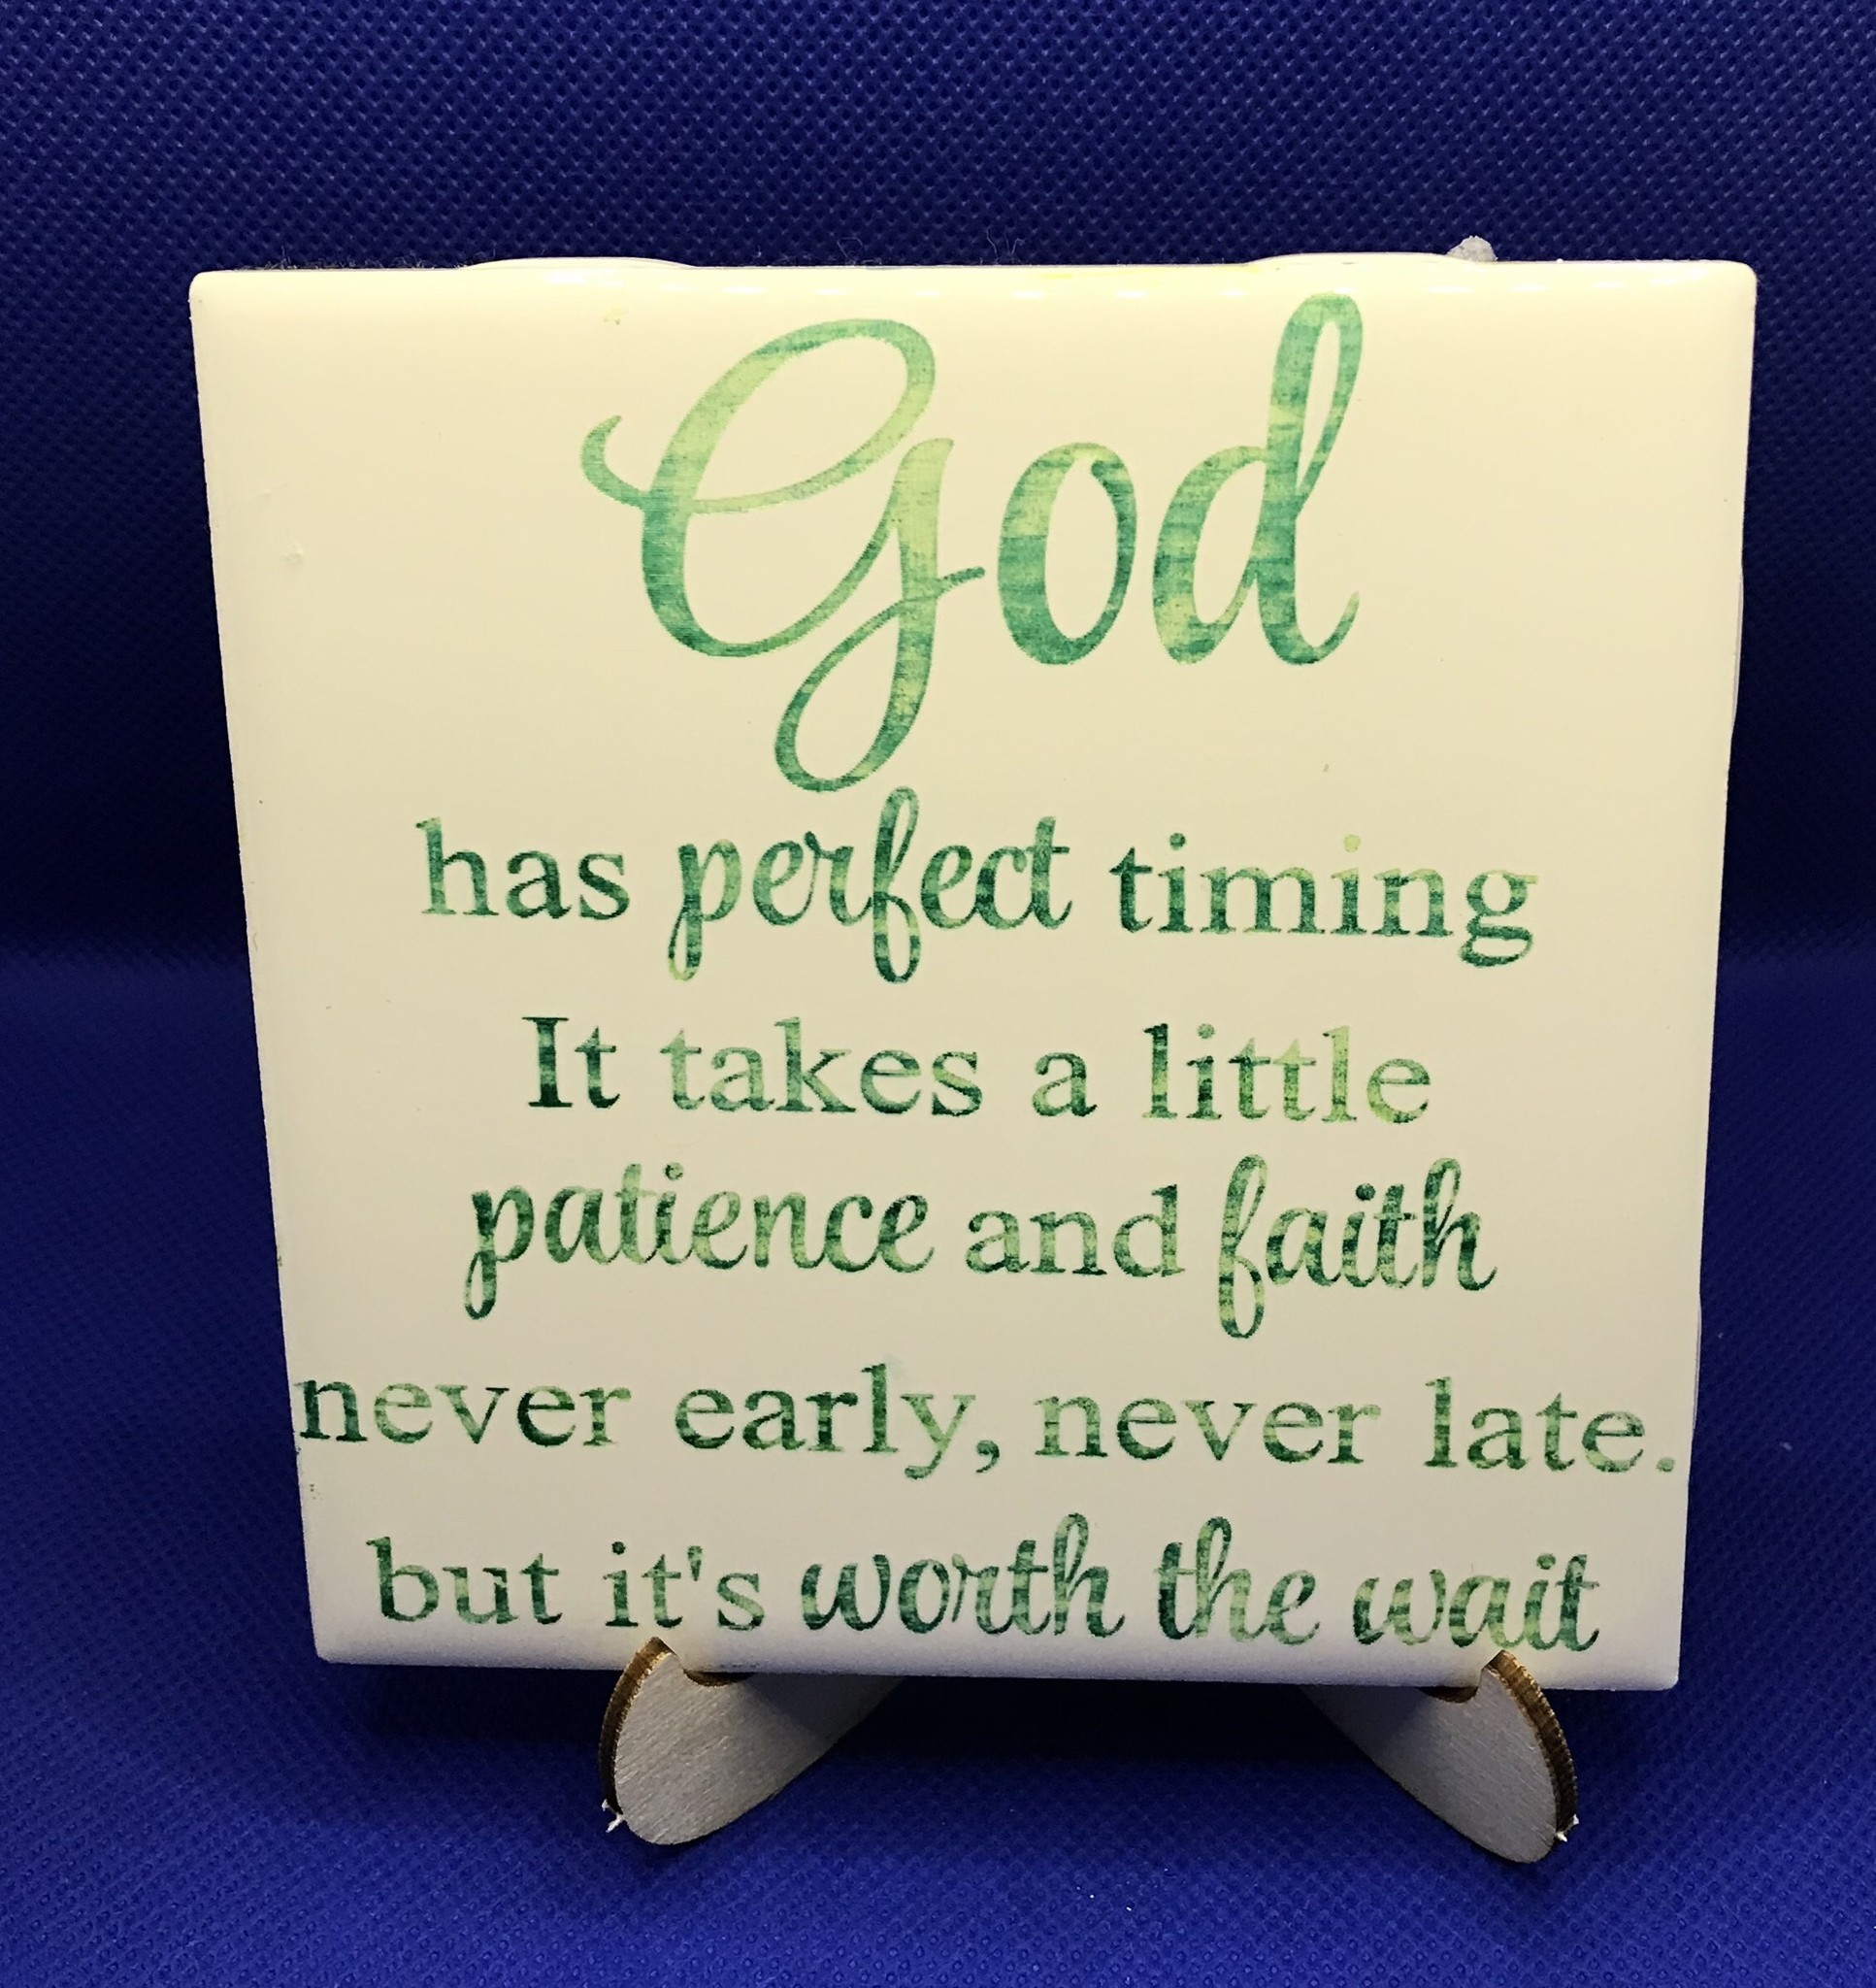 Download 4x4 CERAMIC TILE INSPIRATIONAL - Daystar Boutique & Gifts